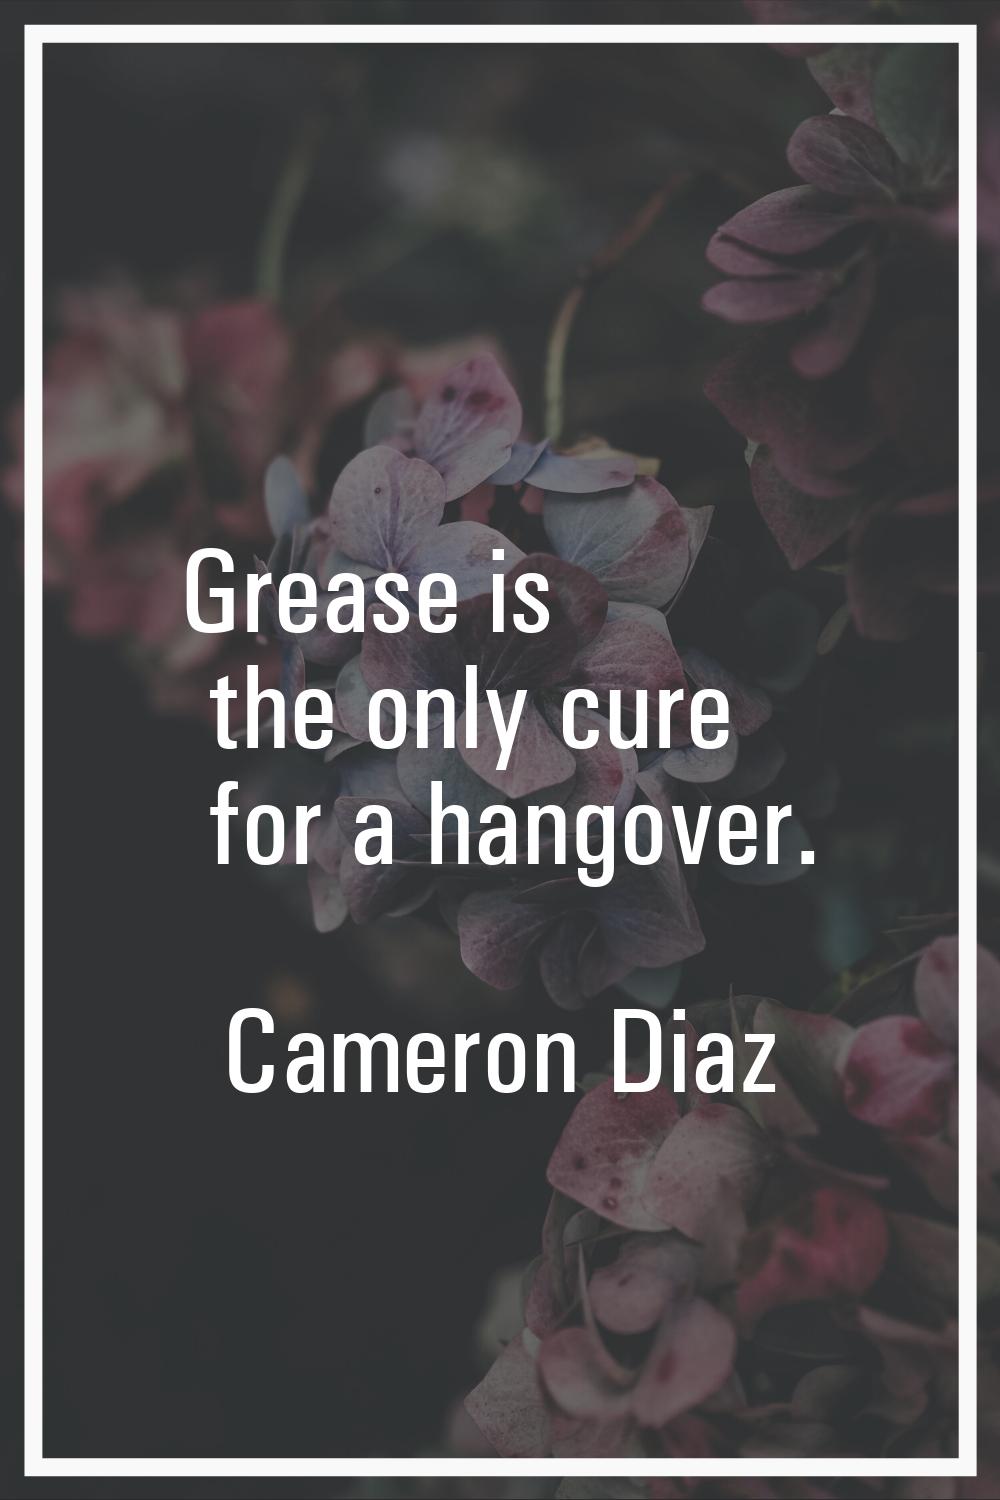 Grease is the only cure for a hangover.